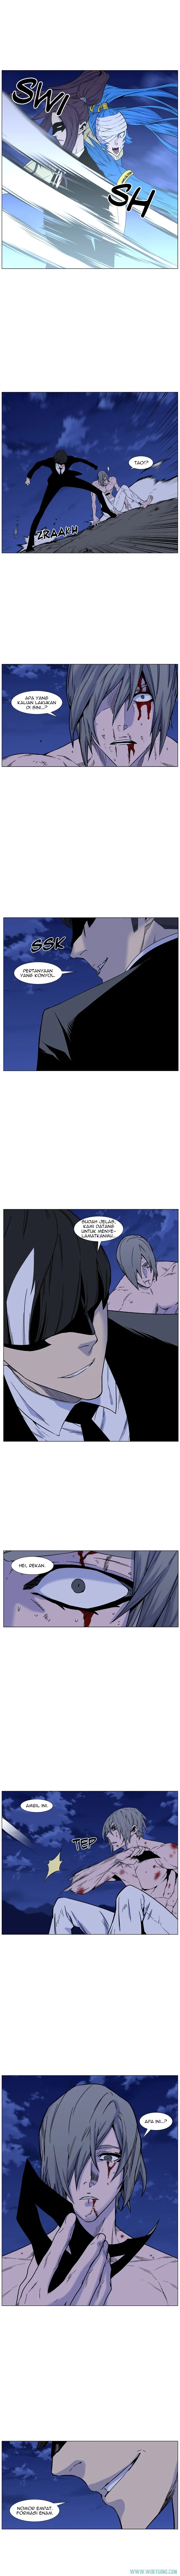 Noblesse Chapter 454 - 83